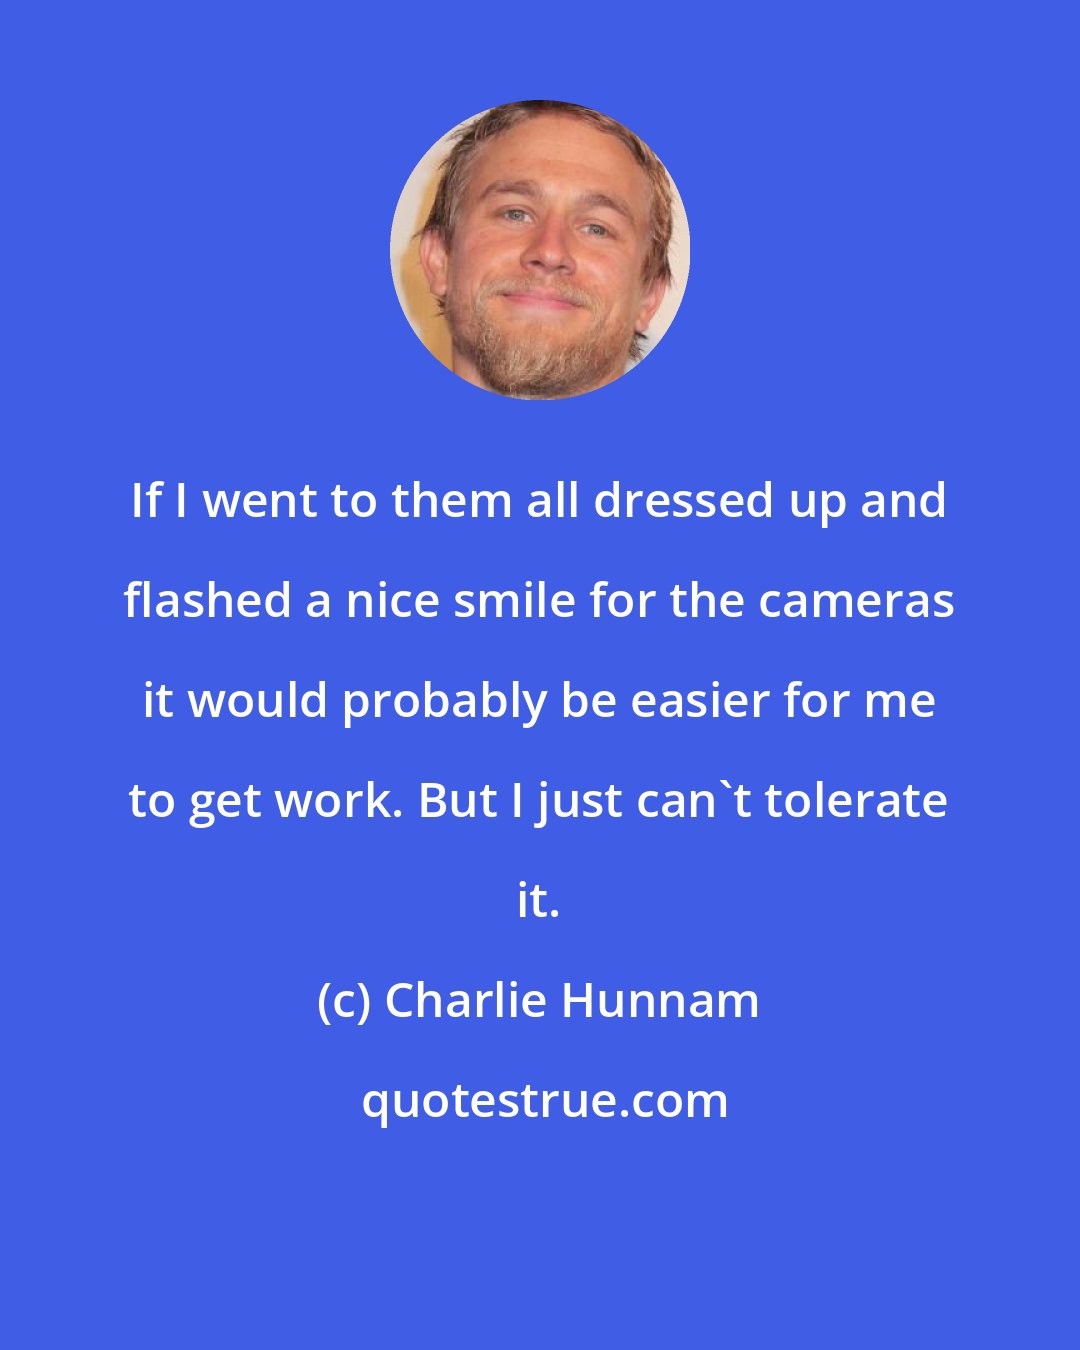 Charlie Hunnam: If I went to them all dressed up and flashed a nice smile for the cameras it would probably be easier for me to get work. But I just can't tolerate it.